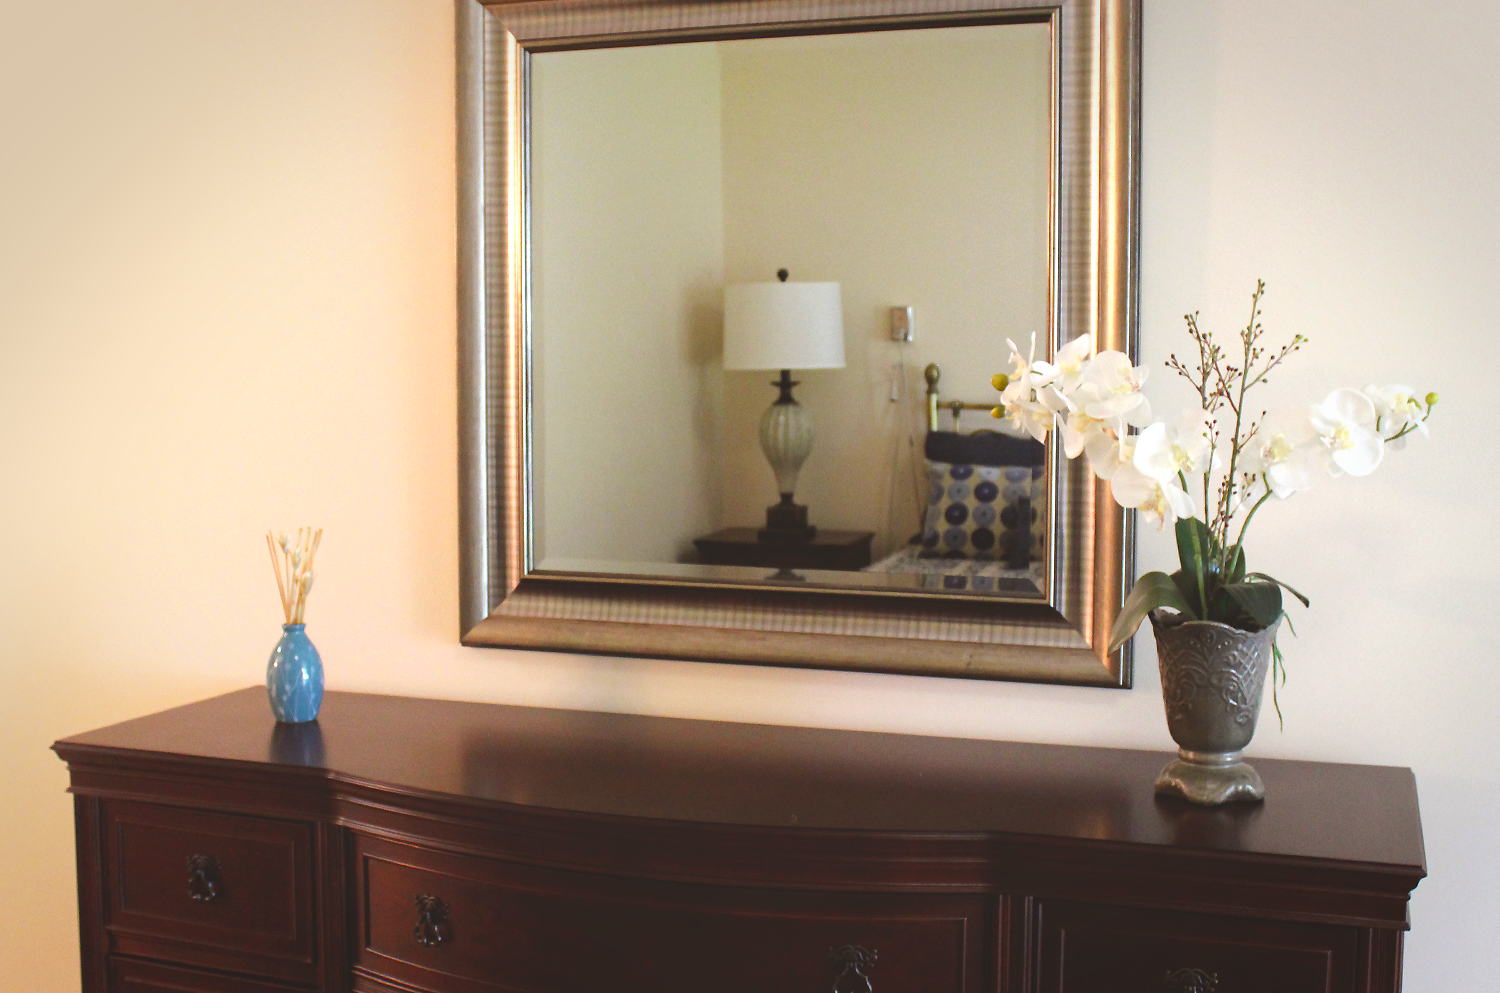 Birchmere Bedroom Mirror. Click to view larger image.